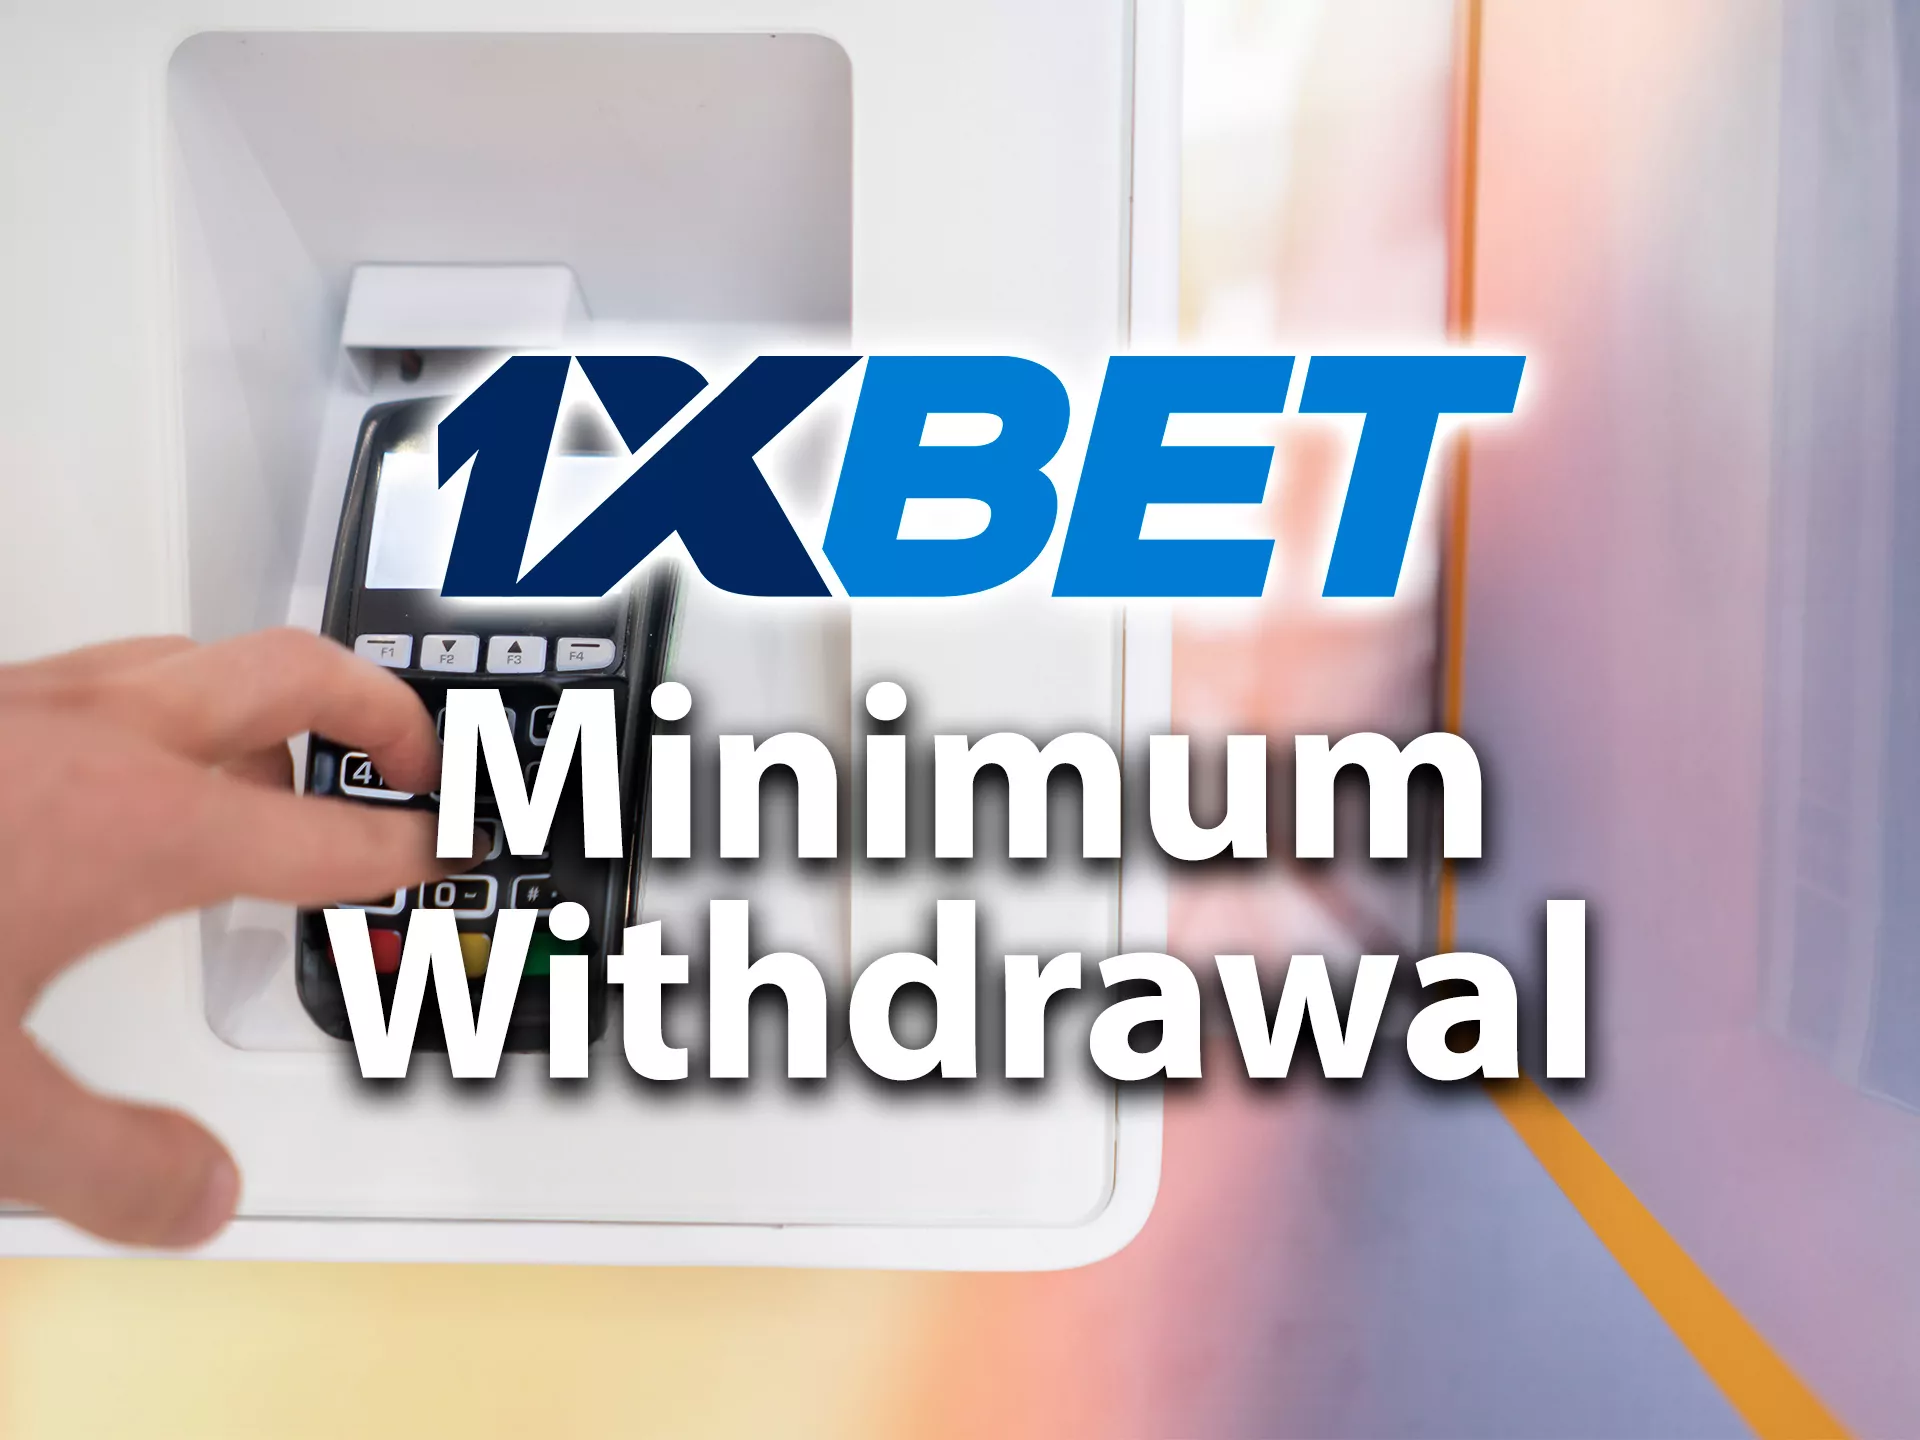 You should withdraw at least INR 112 from 1xbet account.